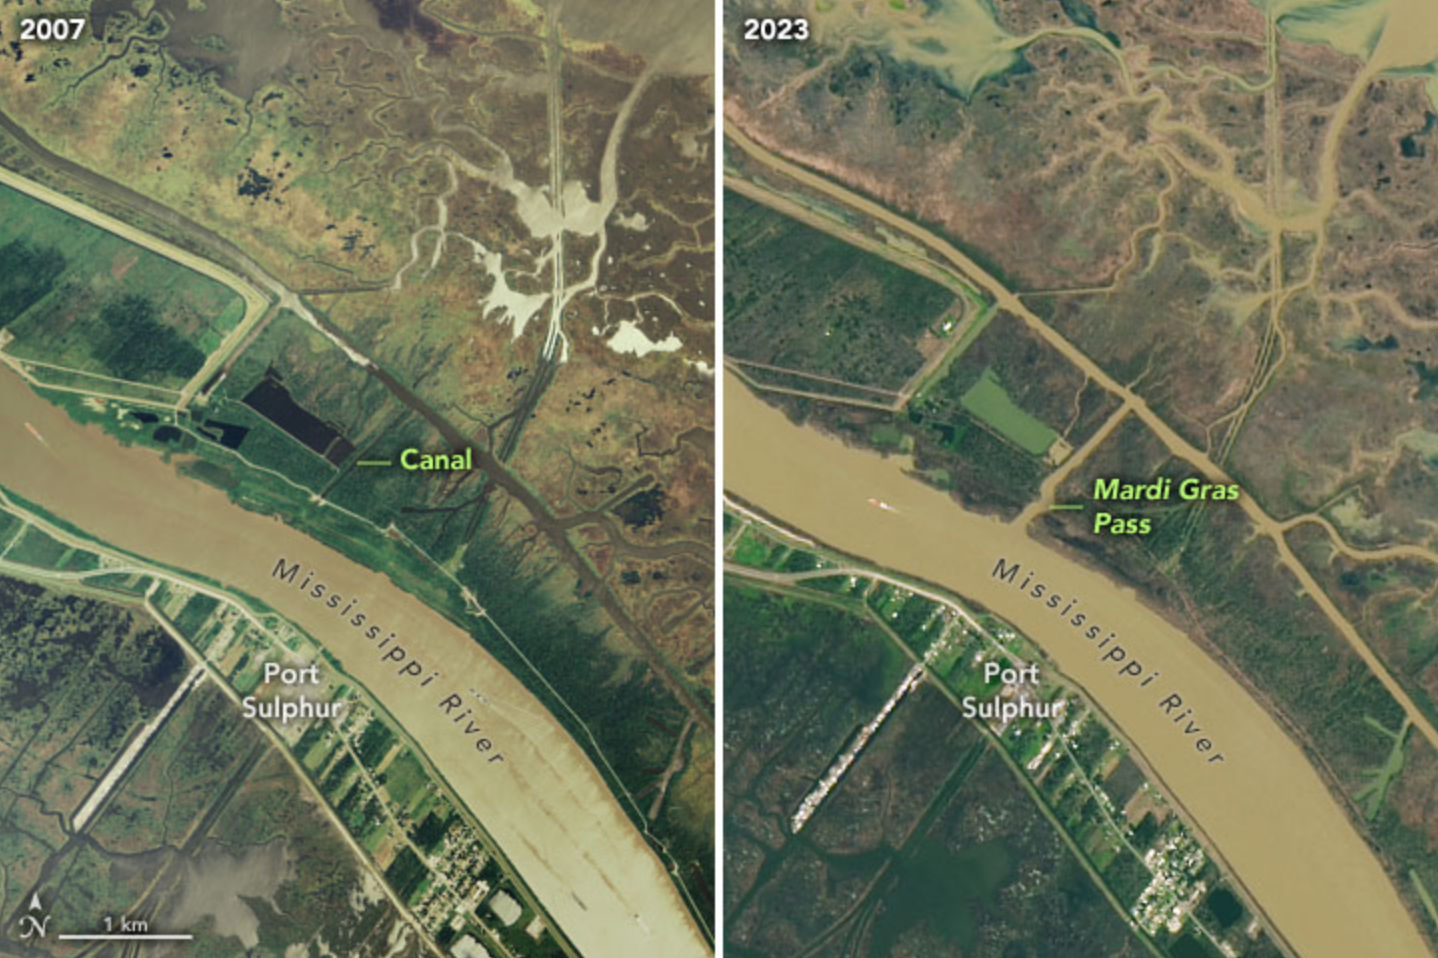 Split screen comparison satellite views of New Orleans canal in Sept 2007 and Sept 2023 